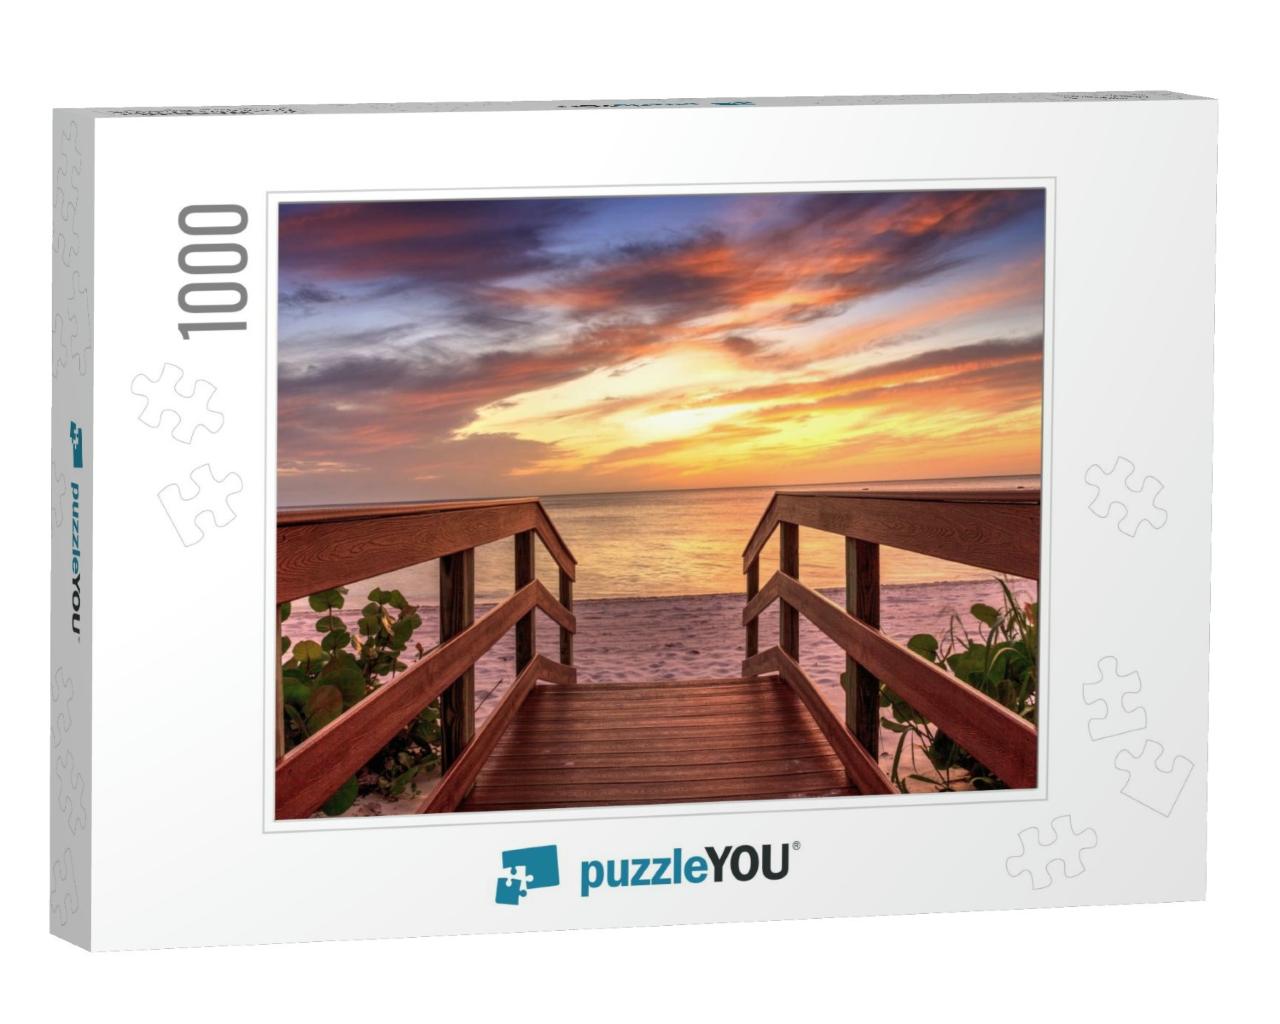 Boardwalk Leading to a Sunset Over North Gulf Shore Beach... Jigsaw Puzzle with 1000 pieces